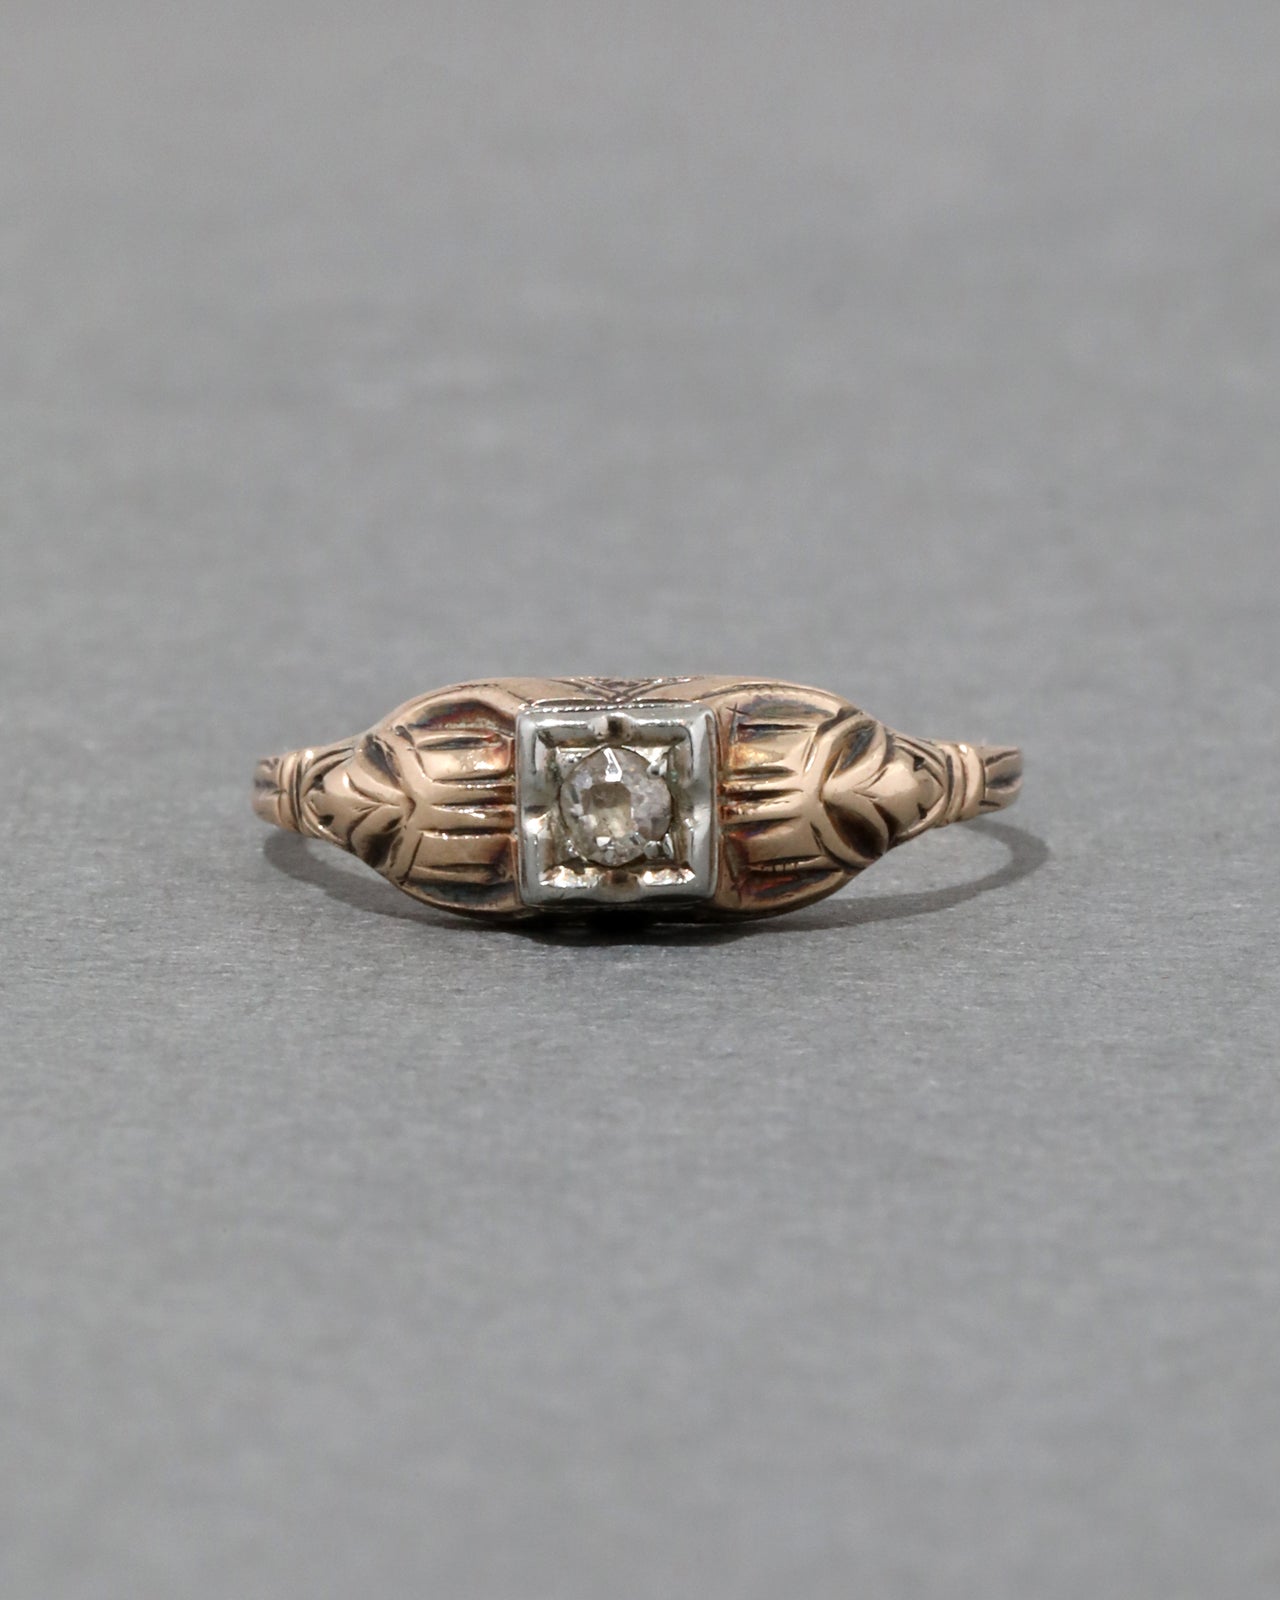 Antique Early 1900s 14k Gold Diamond Band Ring - Photo 2